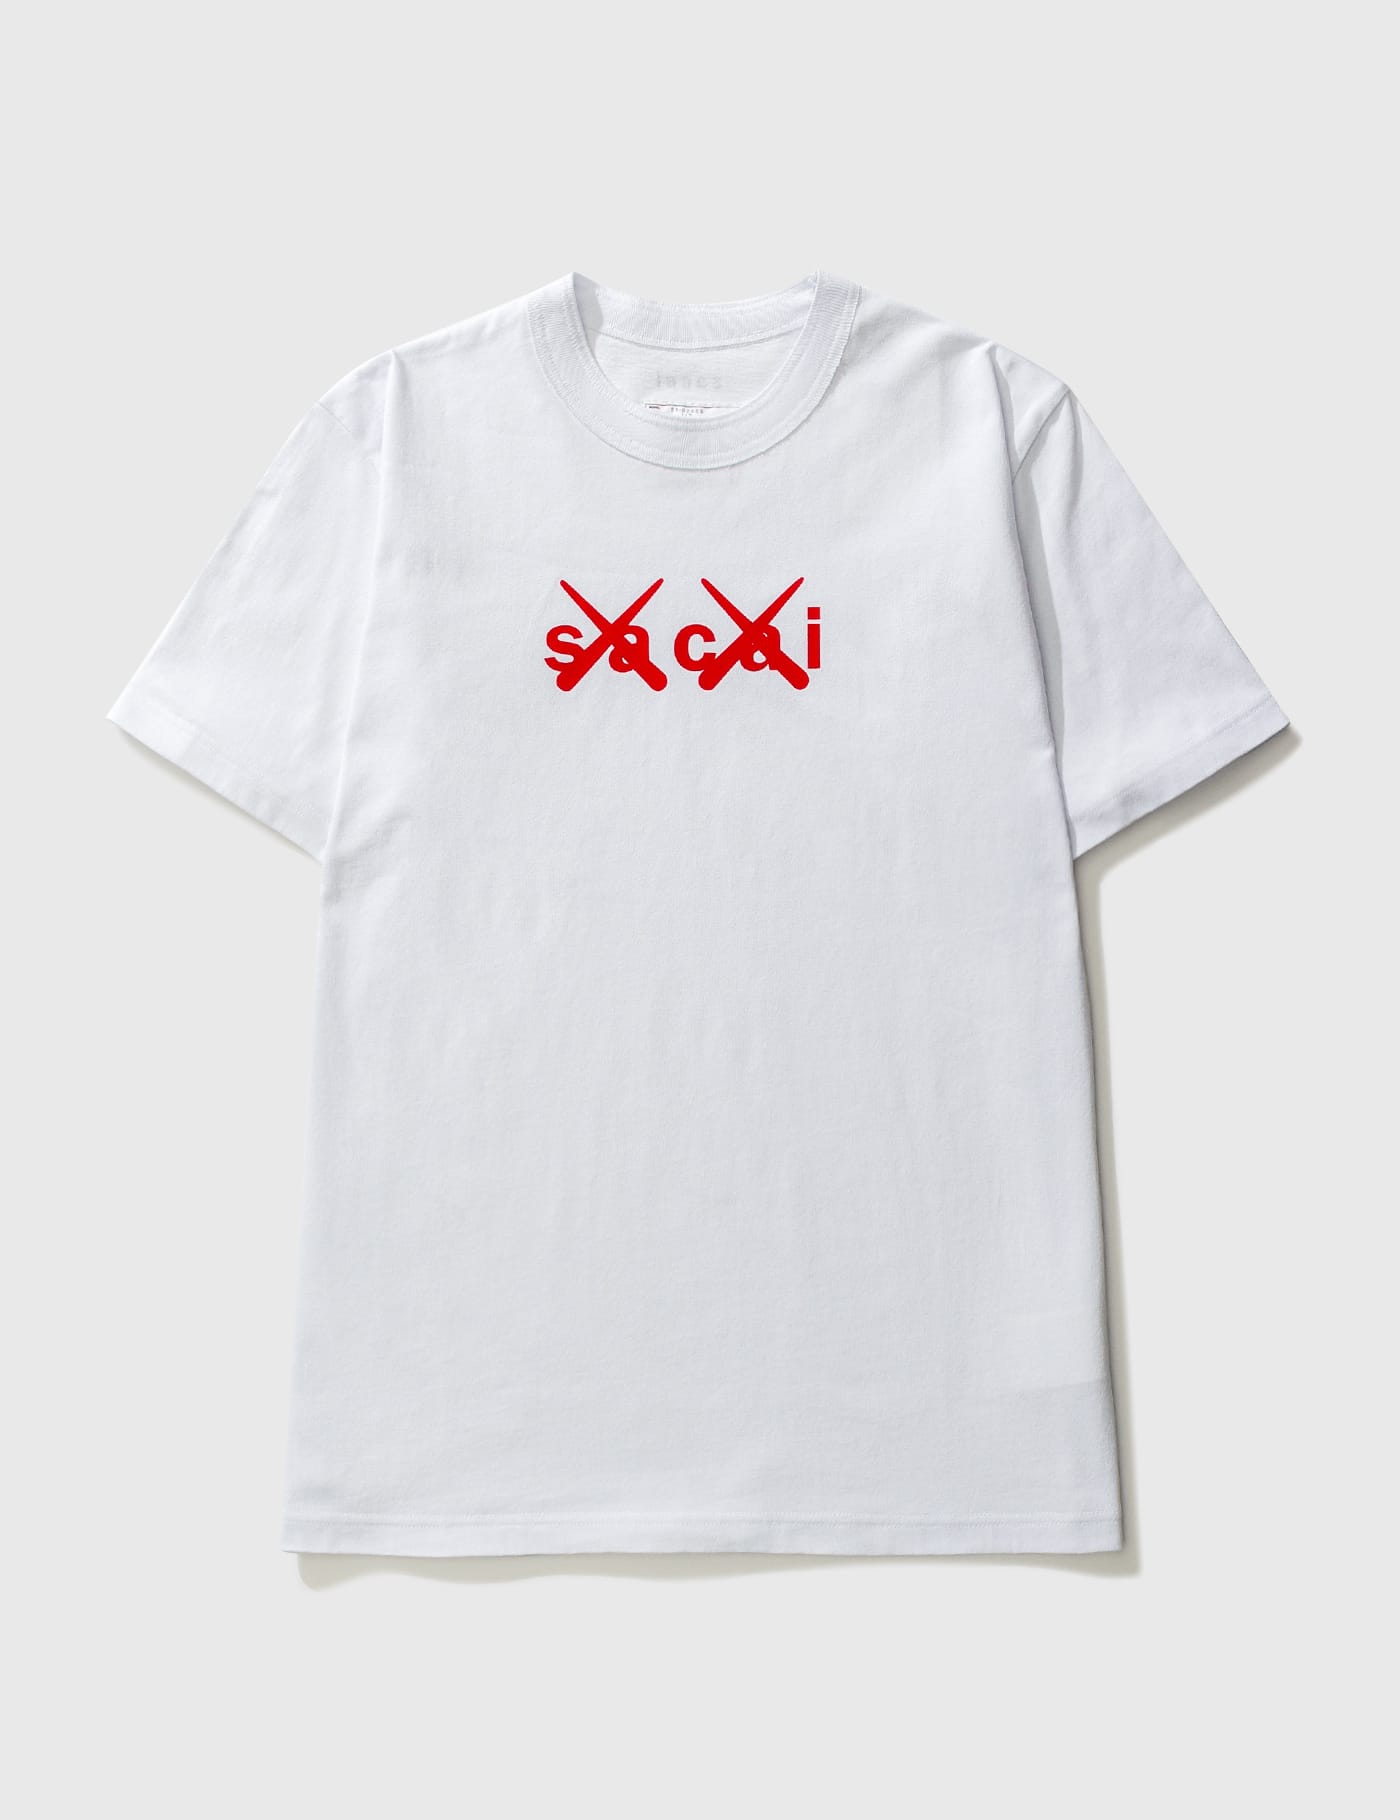 Sacai - KAWS Flock Print T-shirt | HBX - Globally Curated Fashion and  Lifestyle by Hypebeast